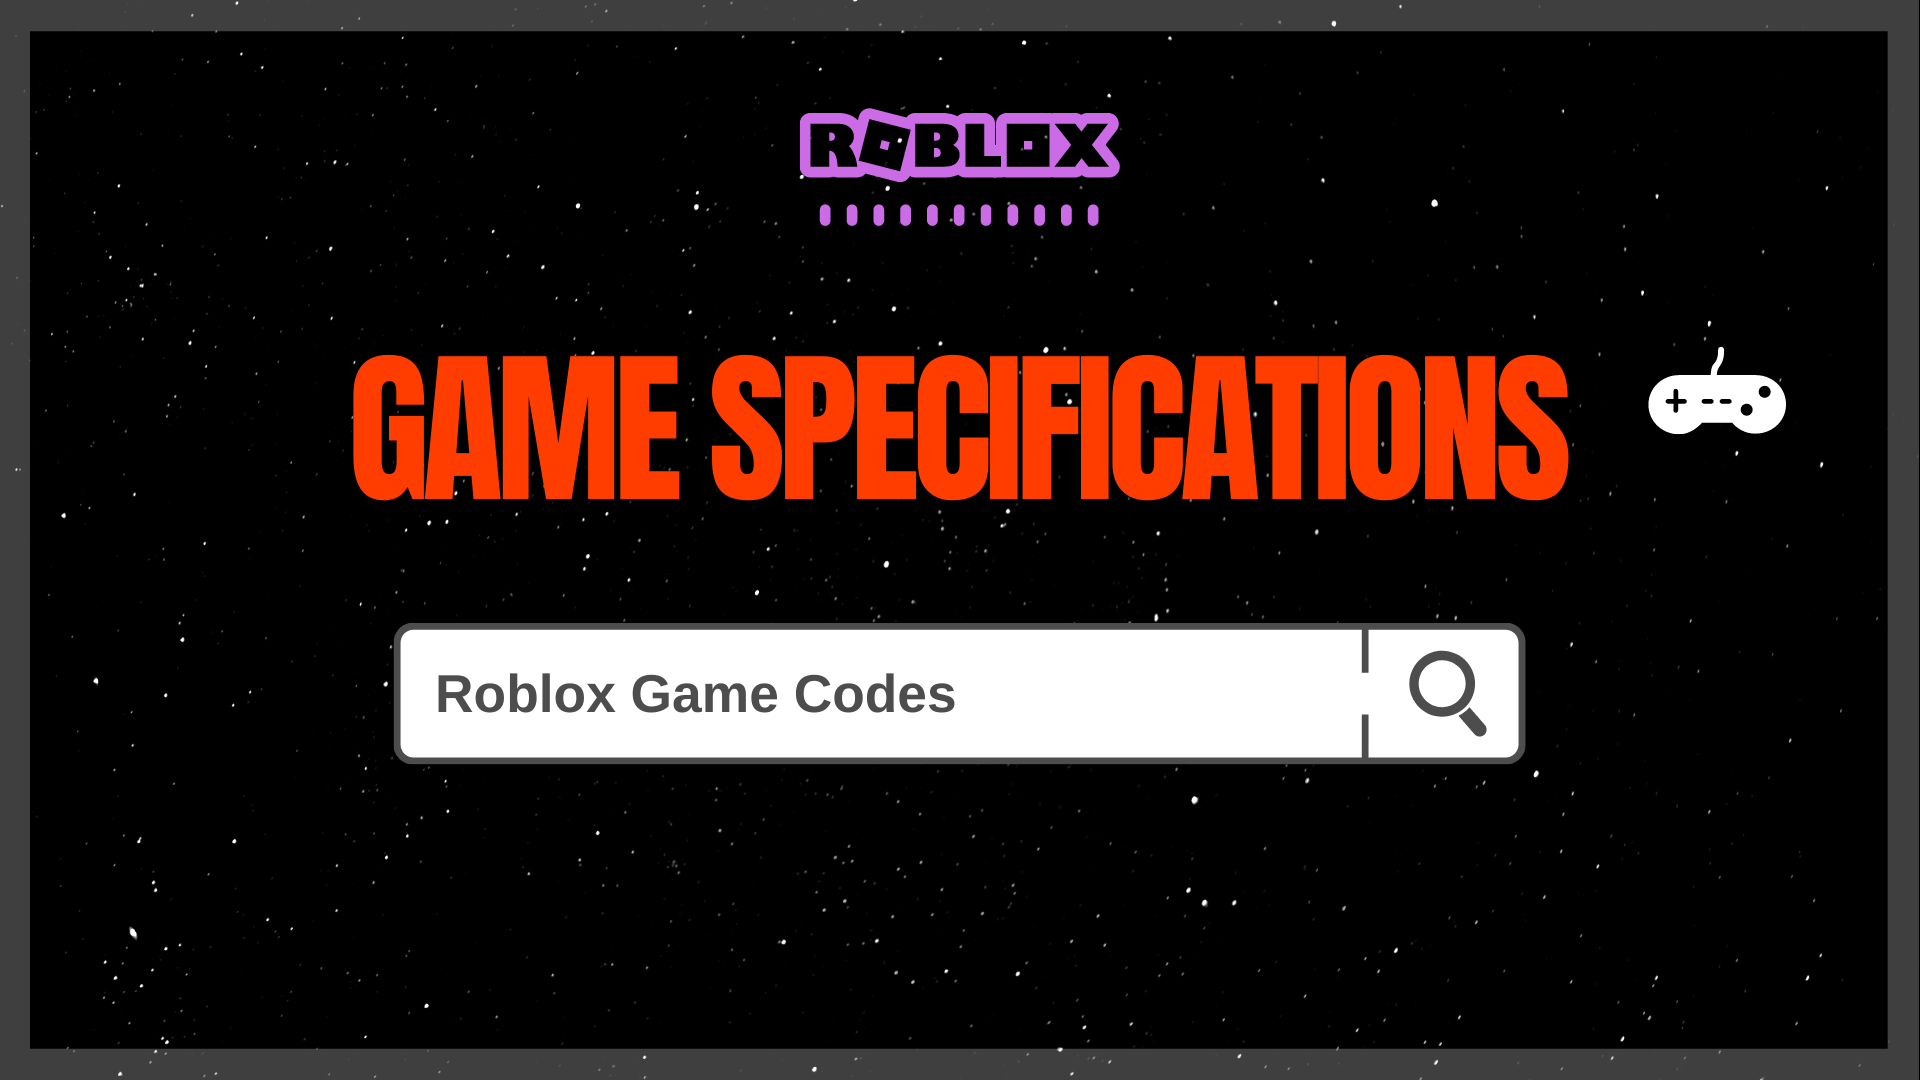 All In One Roblox Game Codes ᐈ Encylopedia Game Specifications - wall climing in roblox